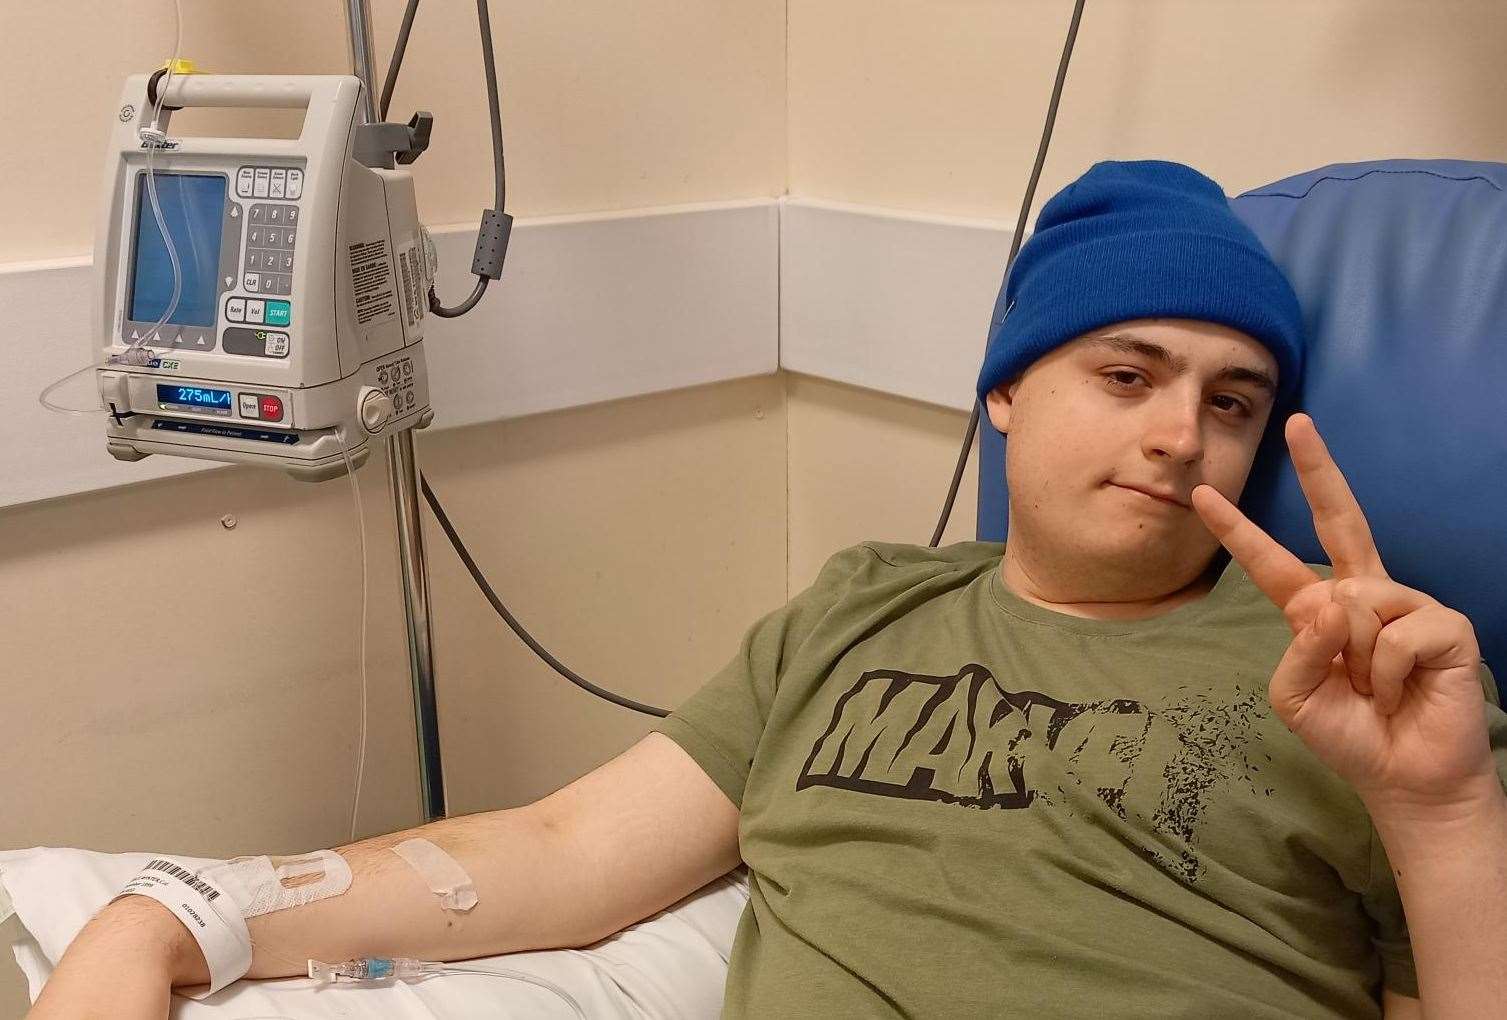 Cal going through a chemotherapy treatment